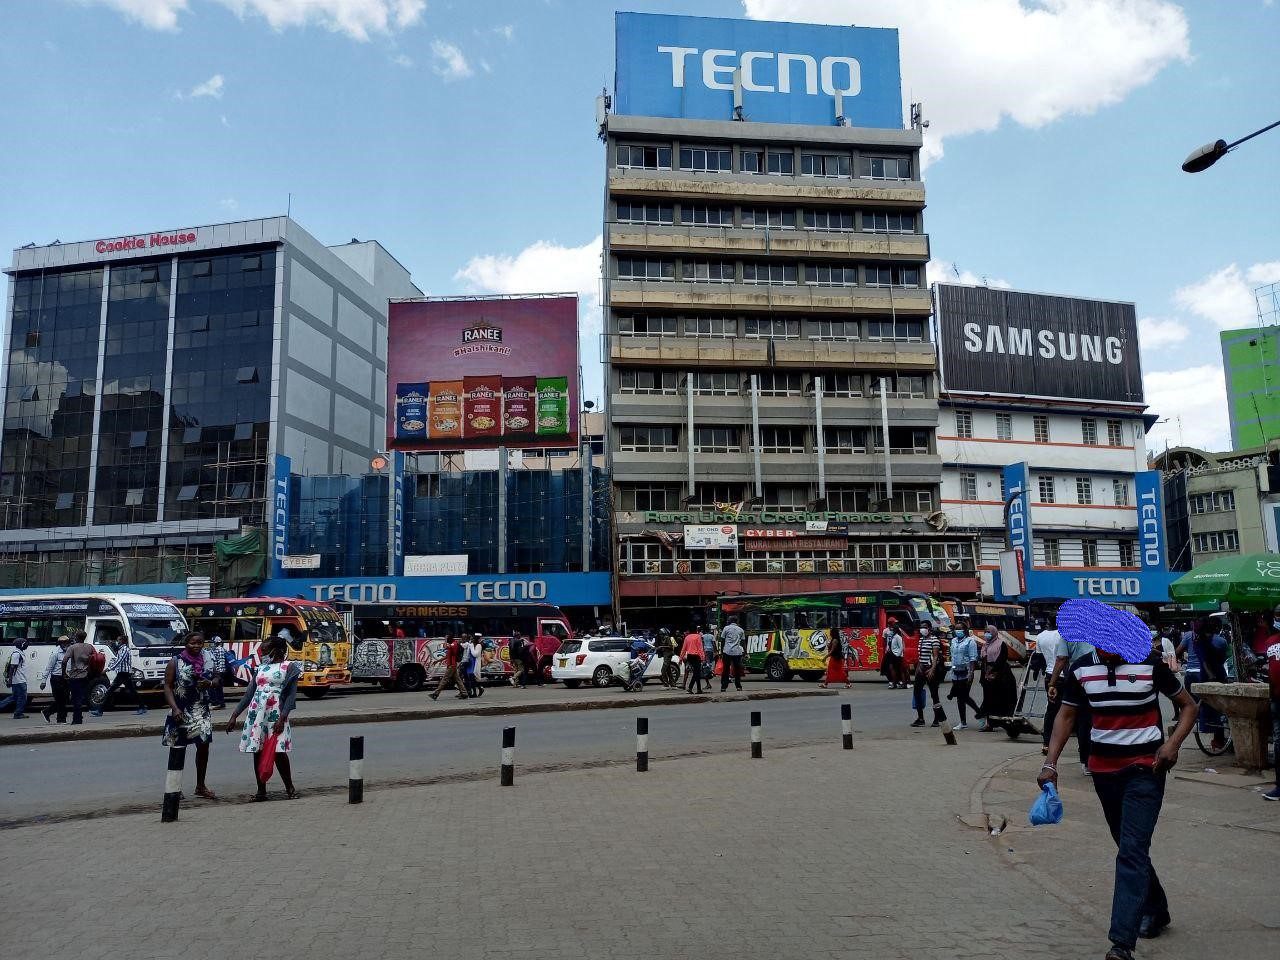 itel Shopping Festival May 15th - June 15th edition